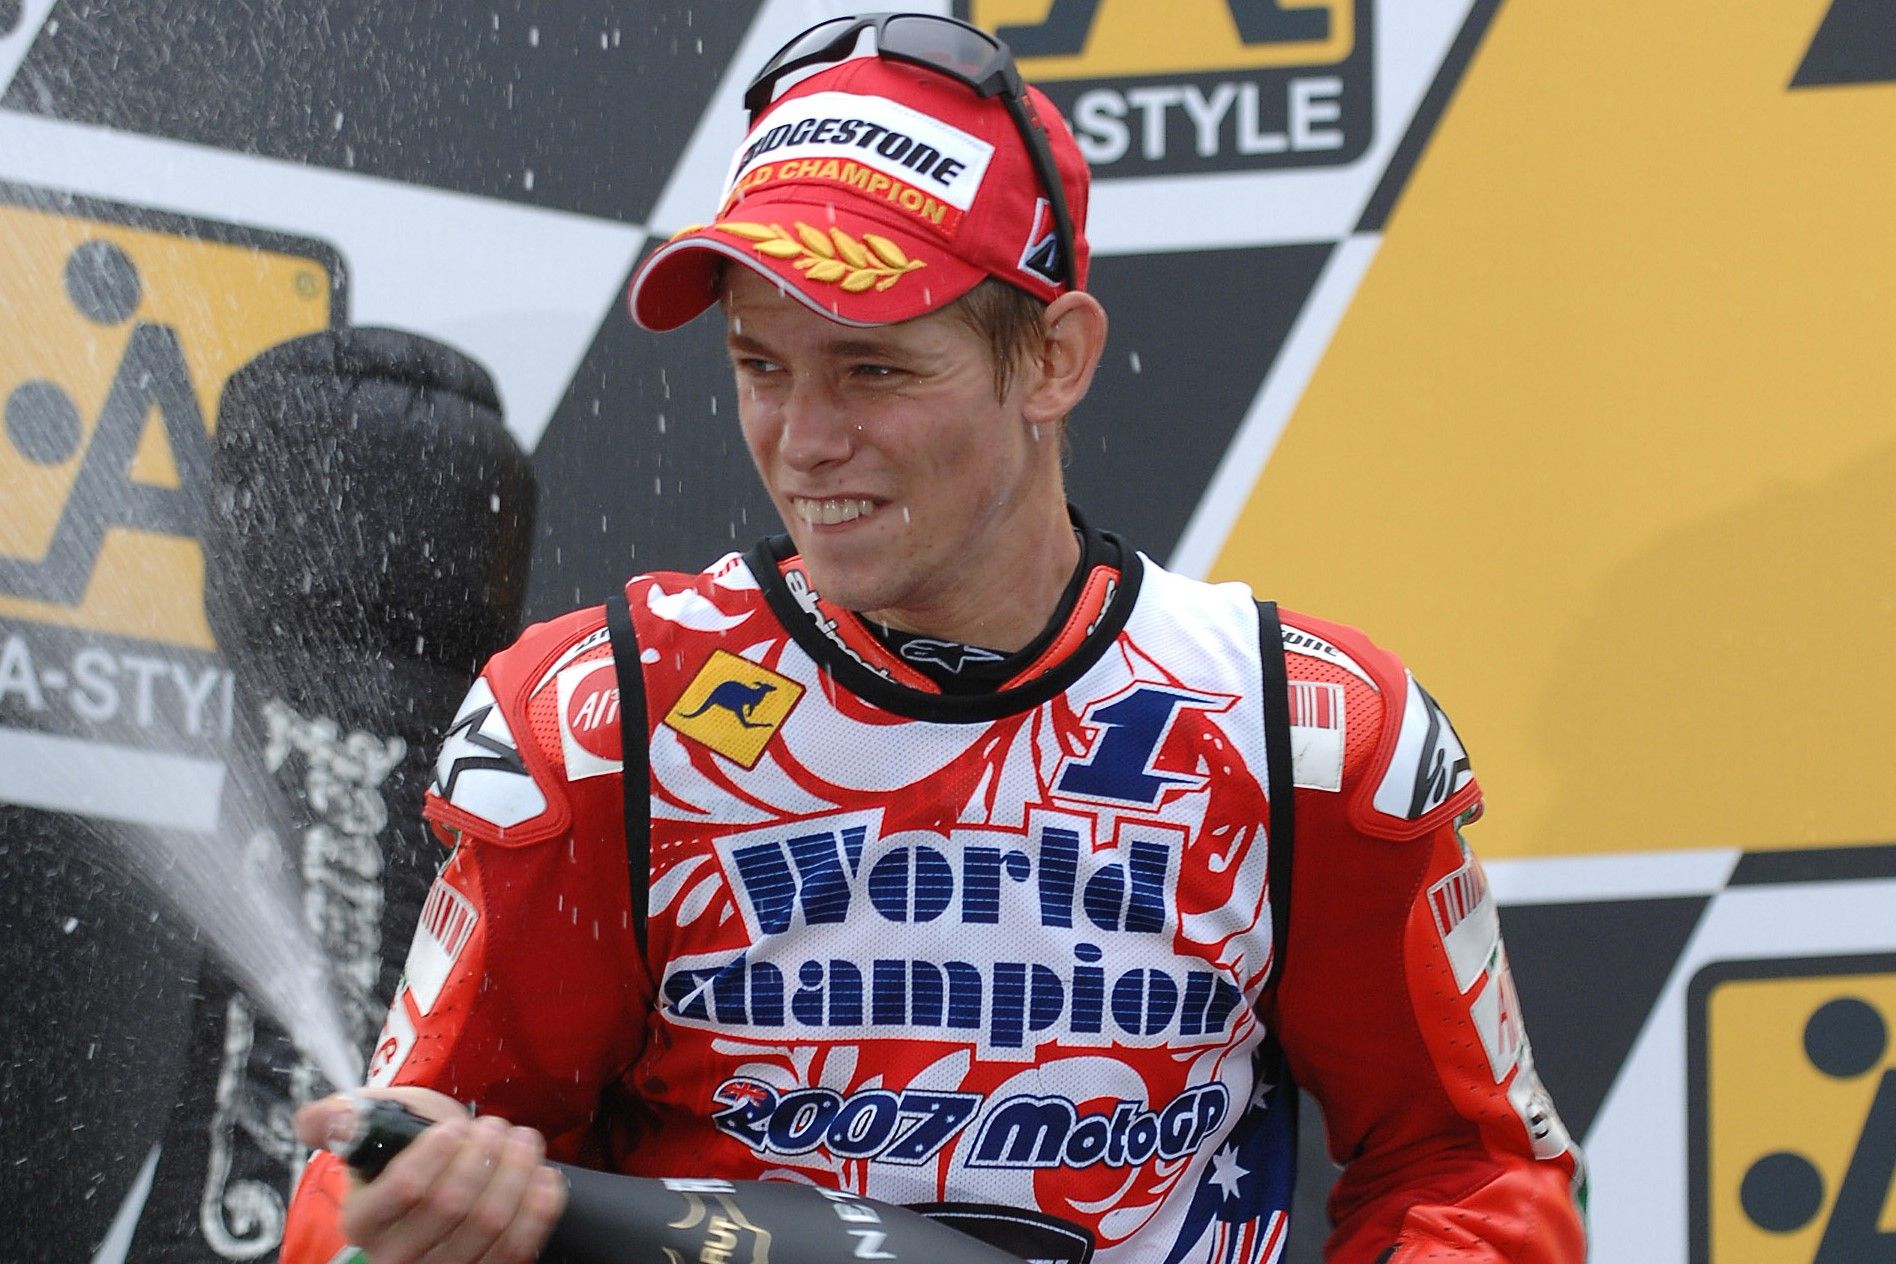 10 Fast Facts About Casey Stoner